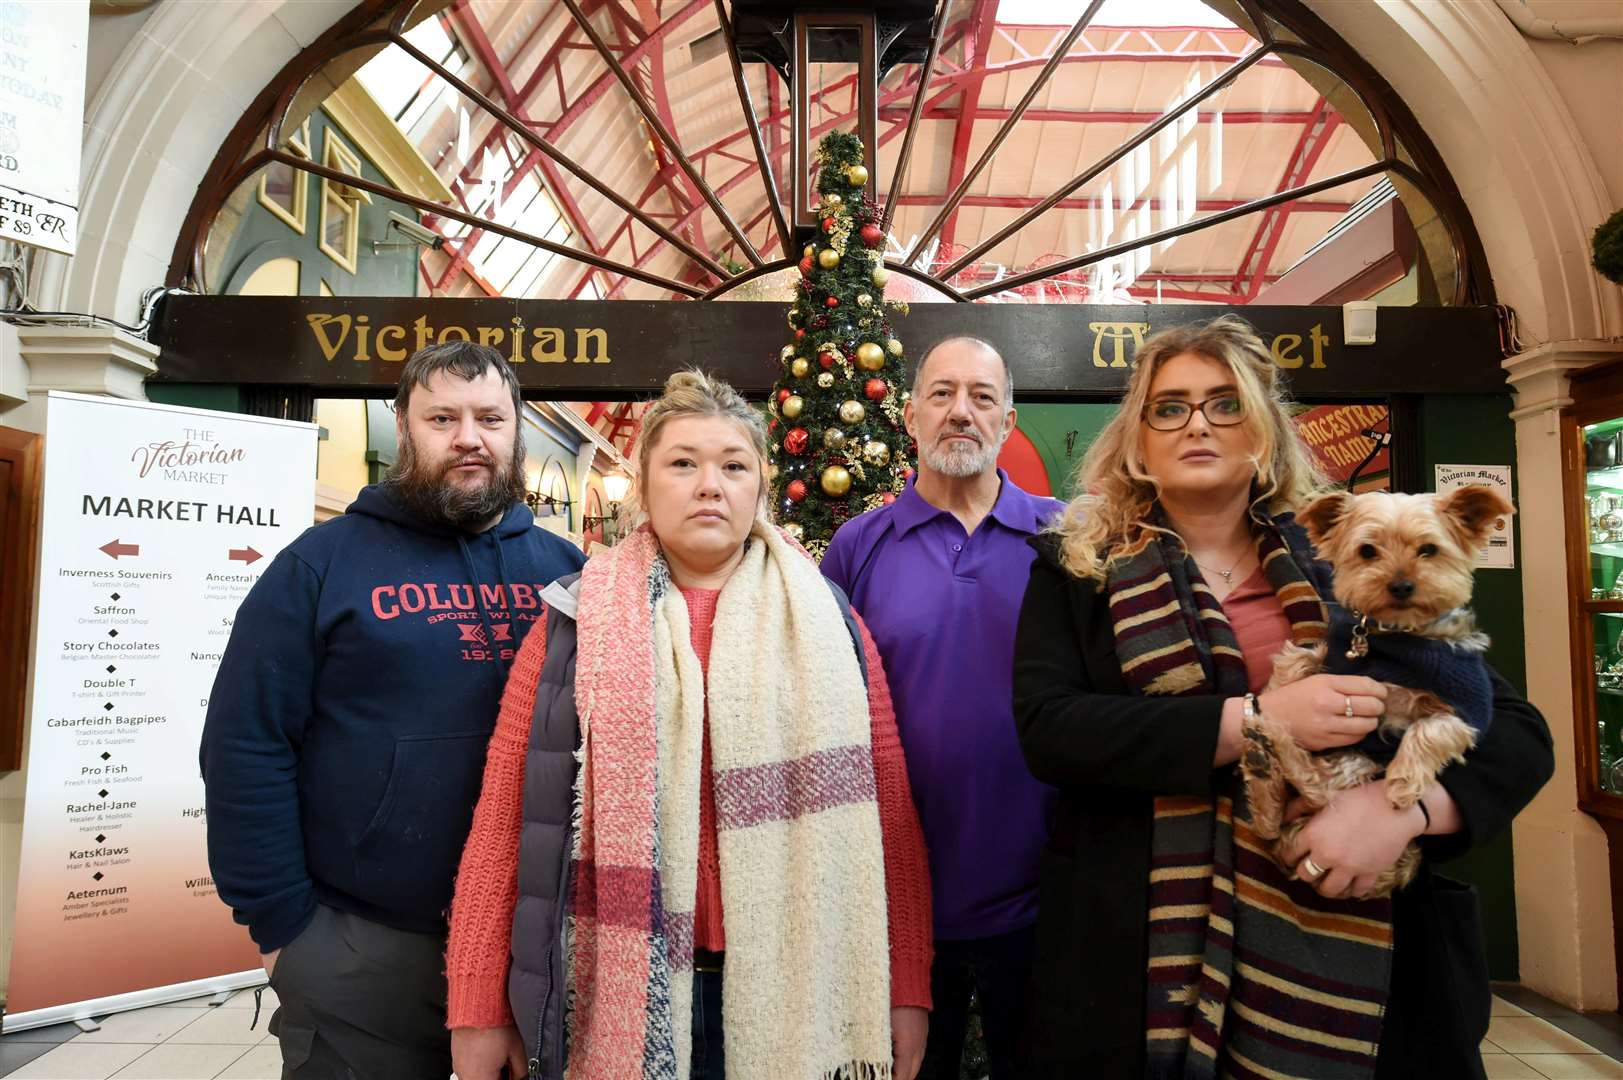 Angry Victorian Market traders have been told they are to be evicted to enable refurbishment.